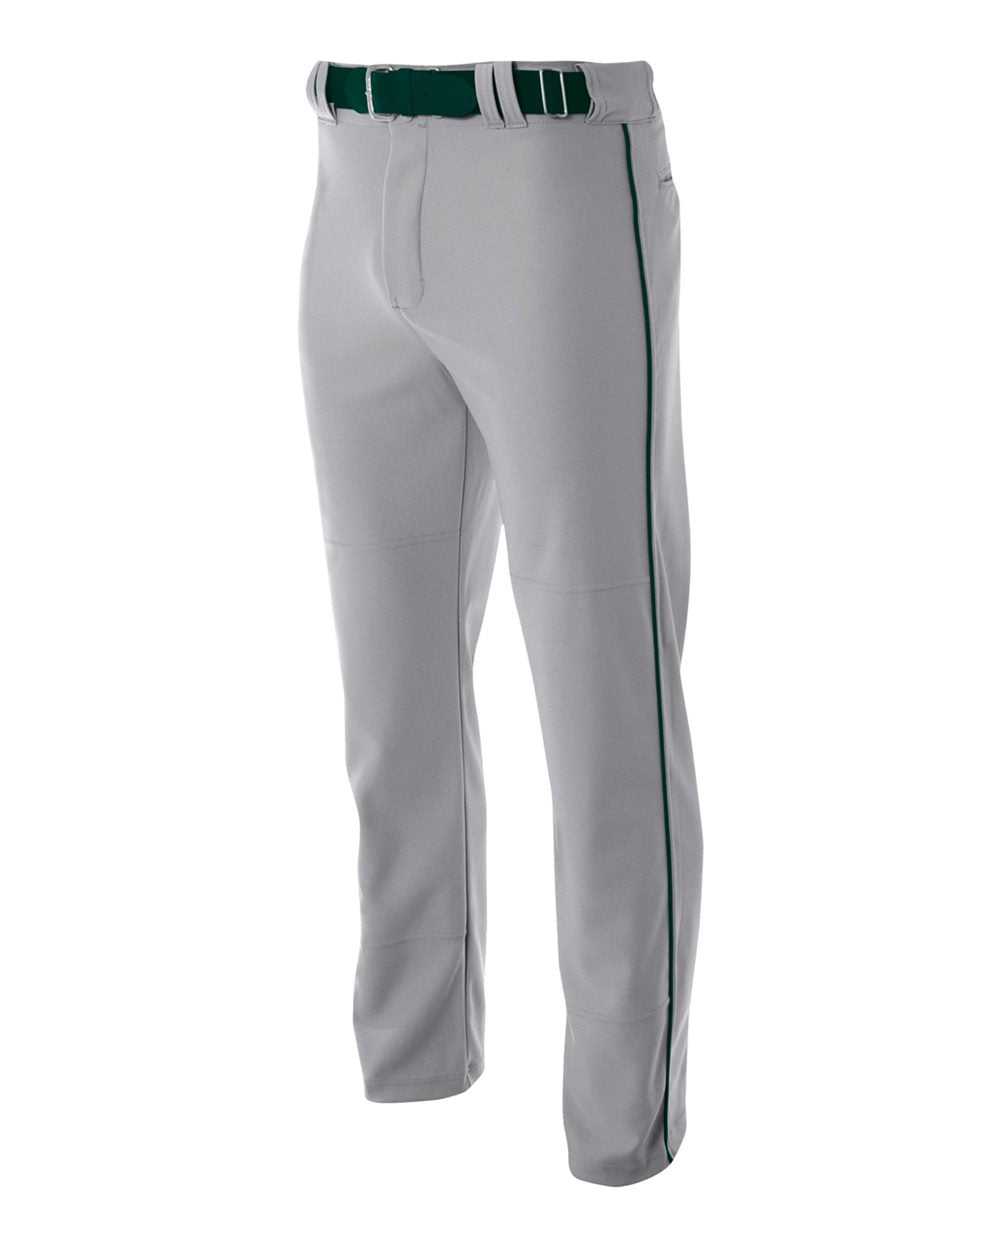 A4 N6162 Pro Style Open Bottom Baggy Cut Baseball Pant - Gray Forest - HIT a Double